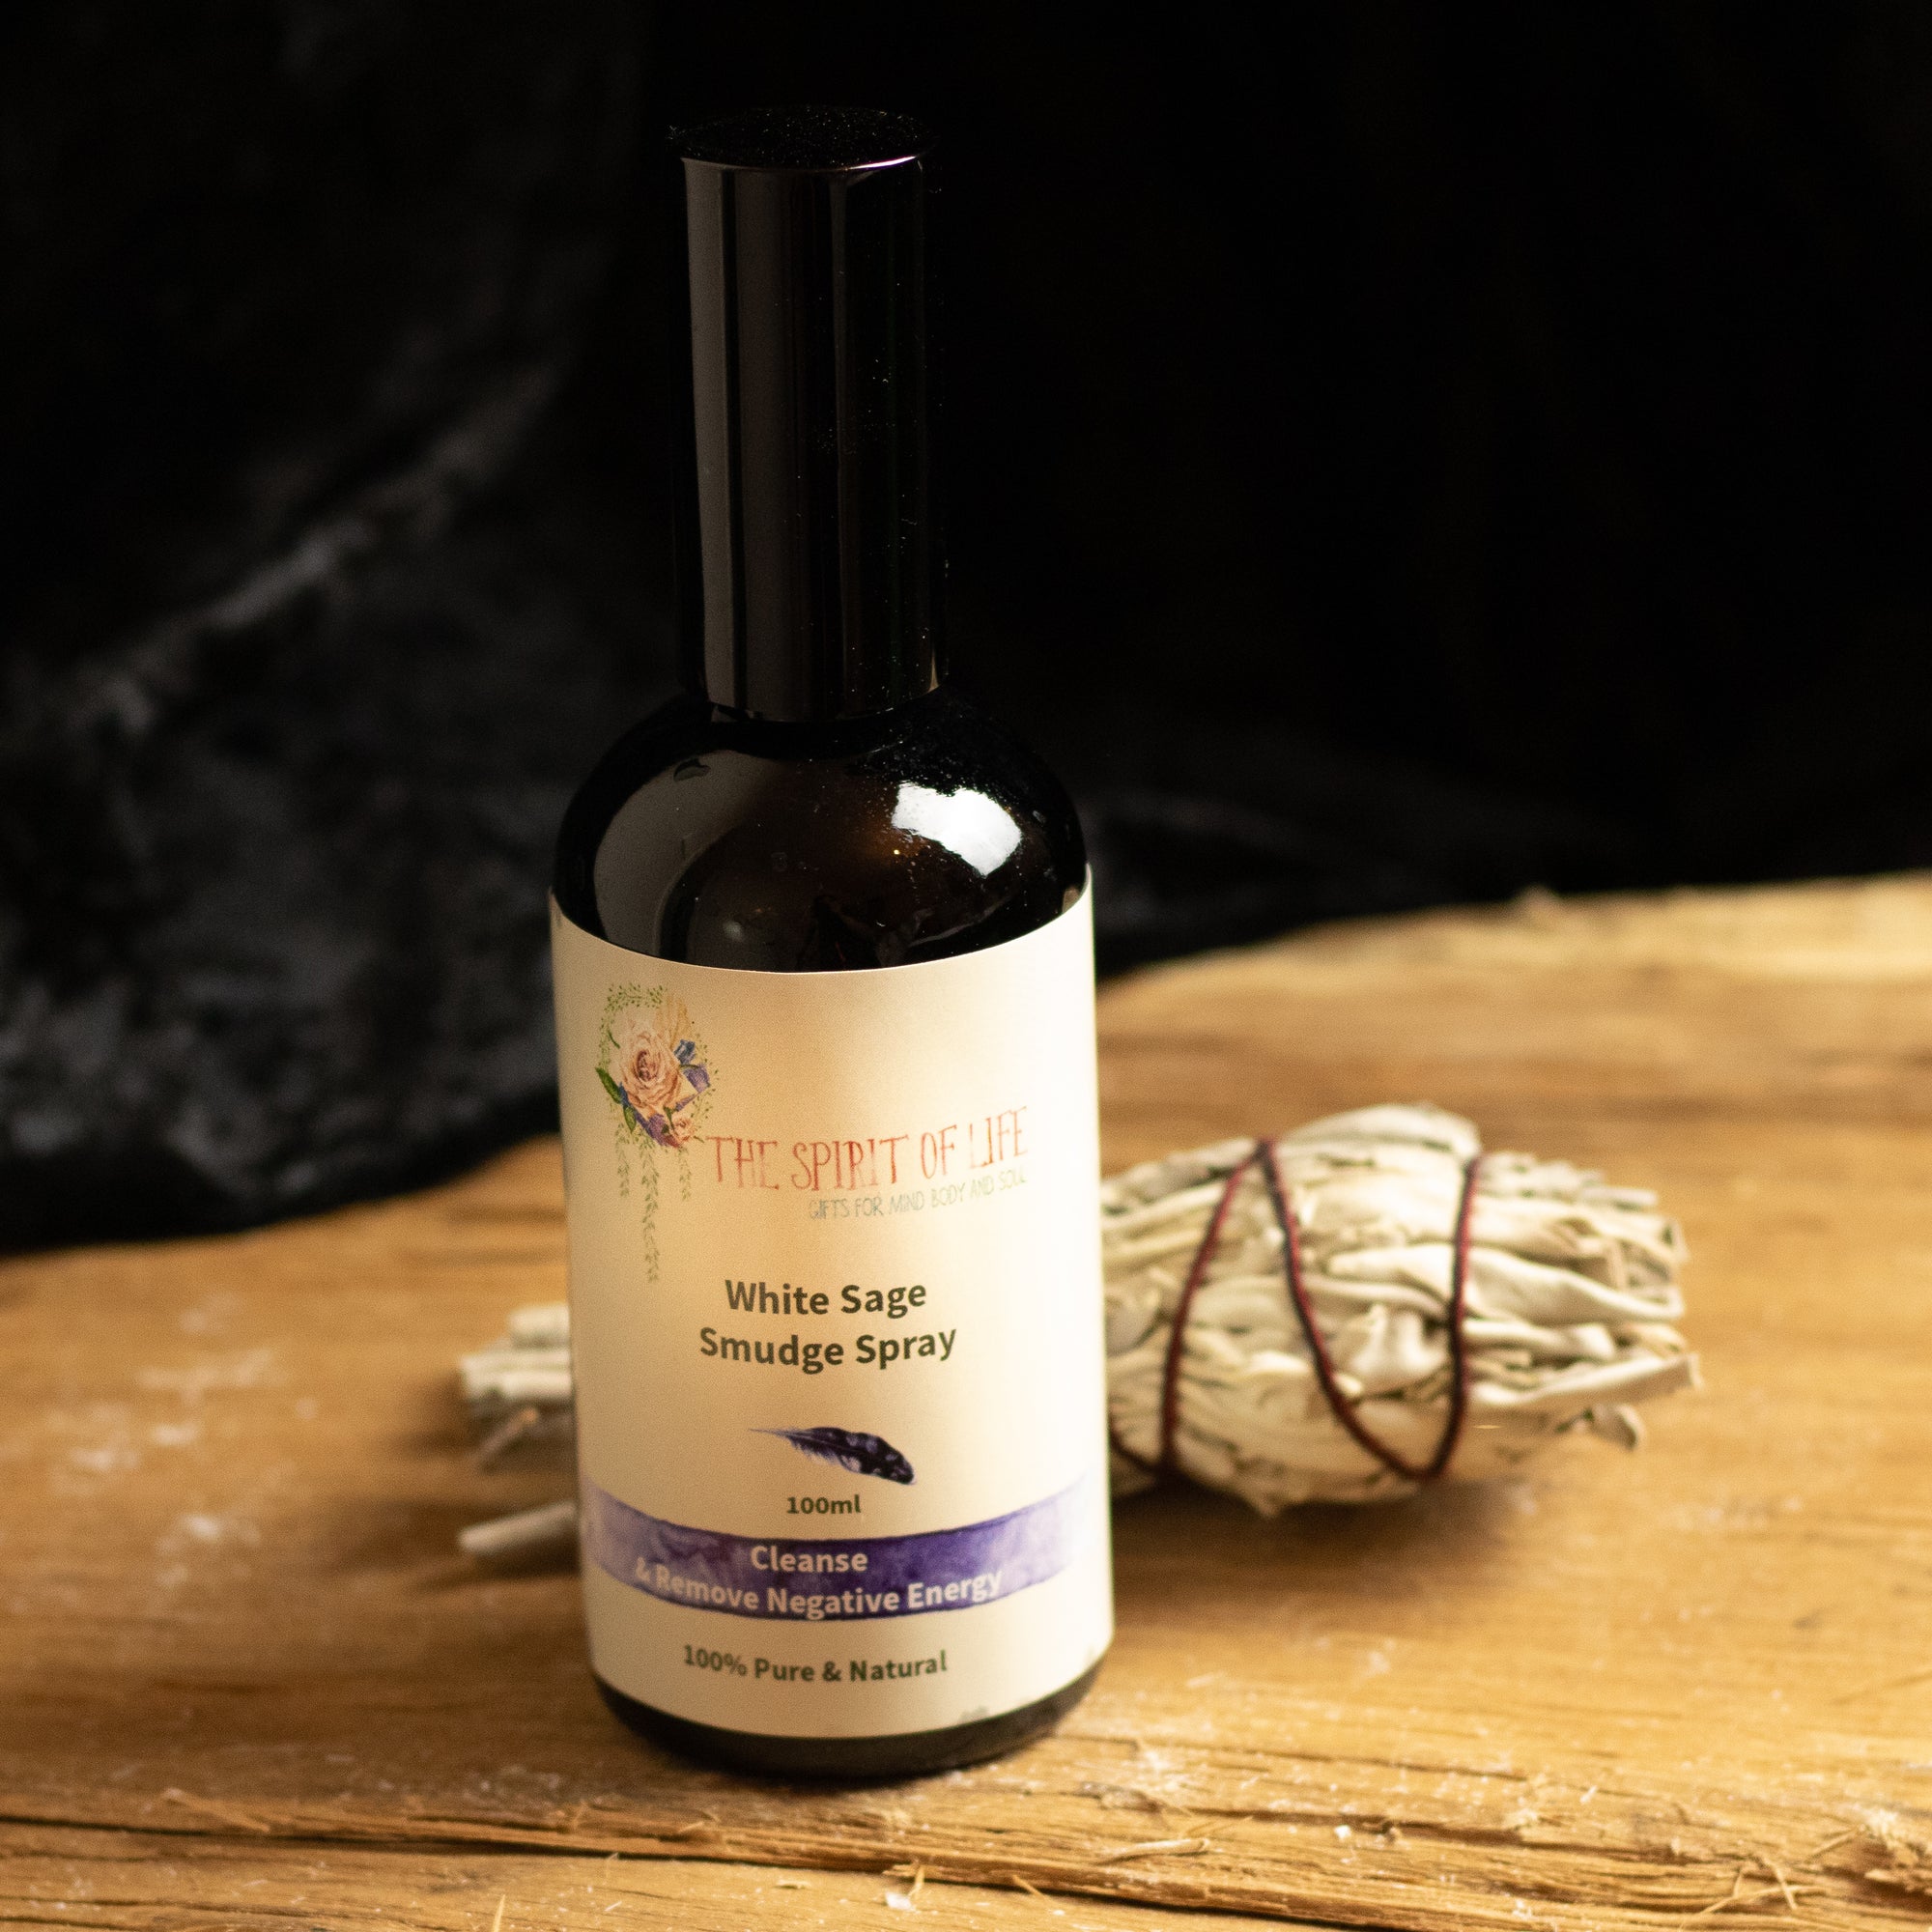 White Sage Clearing Spray - The Spirit of Life